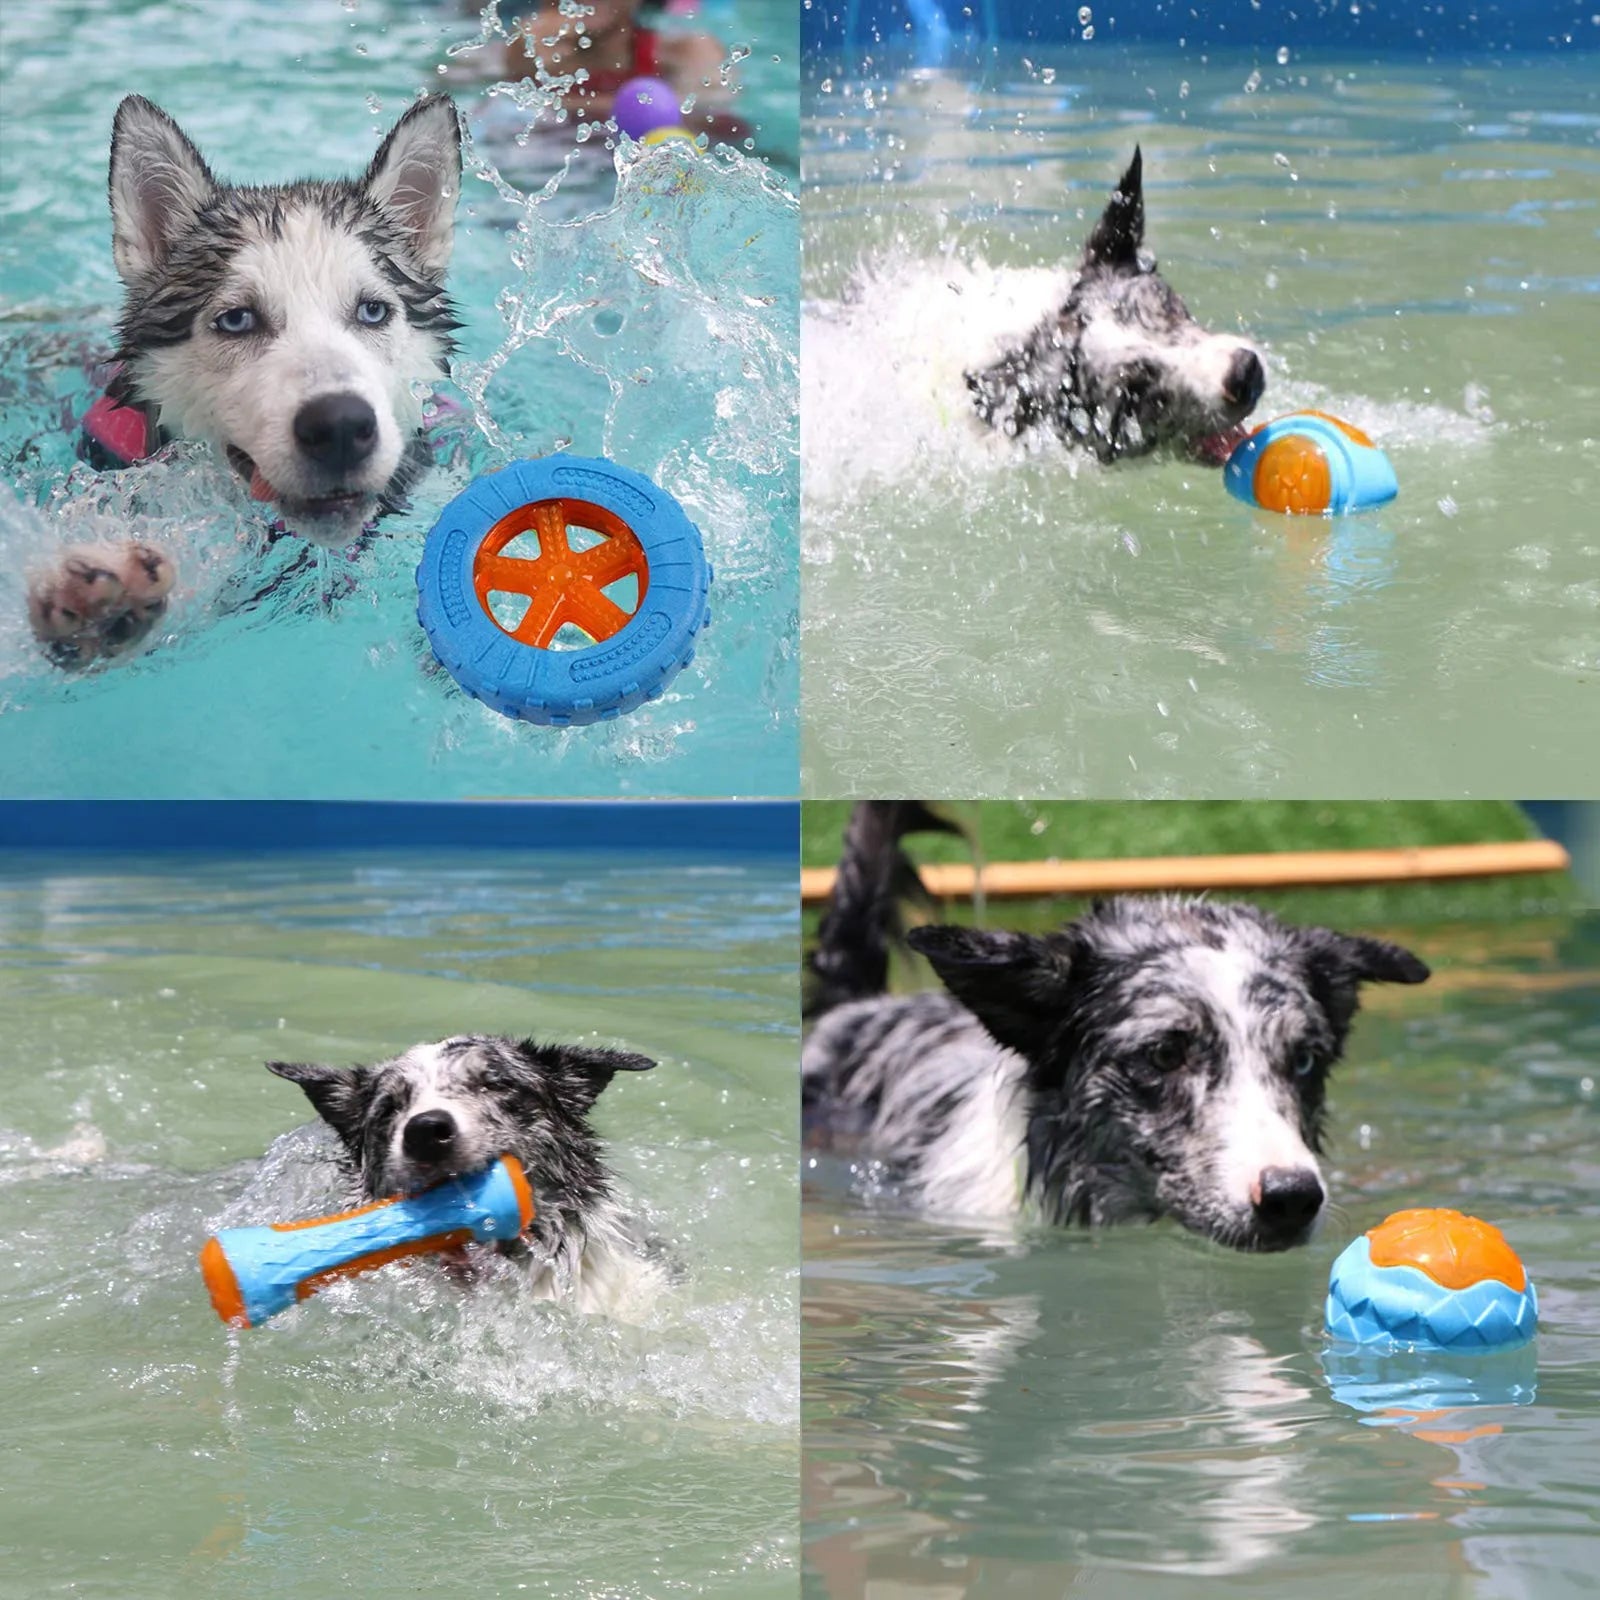 Rubber Dog Chewing Toys: Ultimate Solution for Large Dogs' Dental Health  petlums.com   